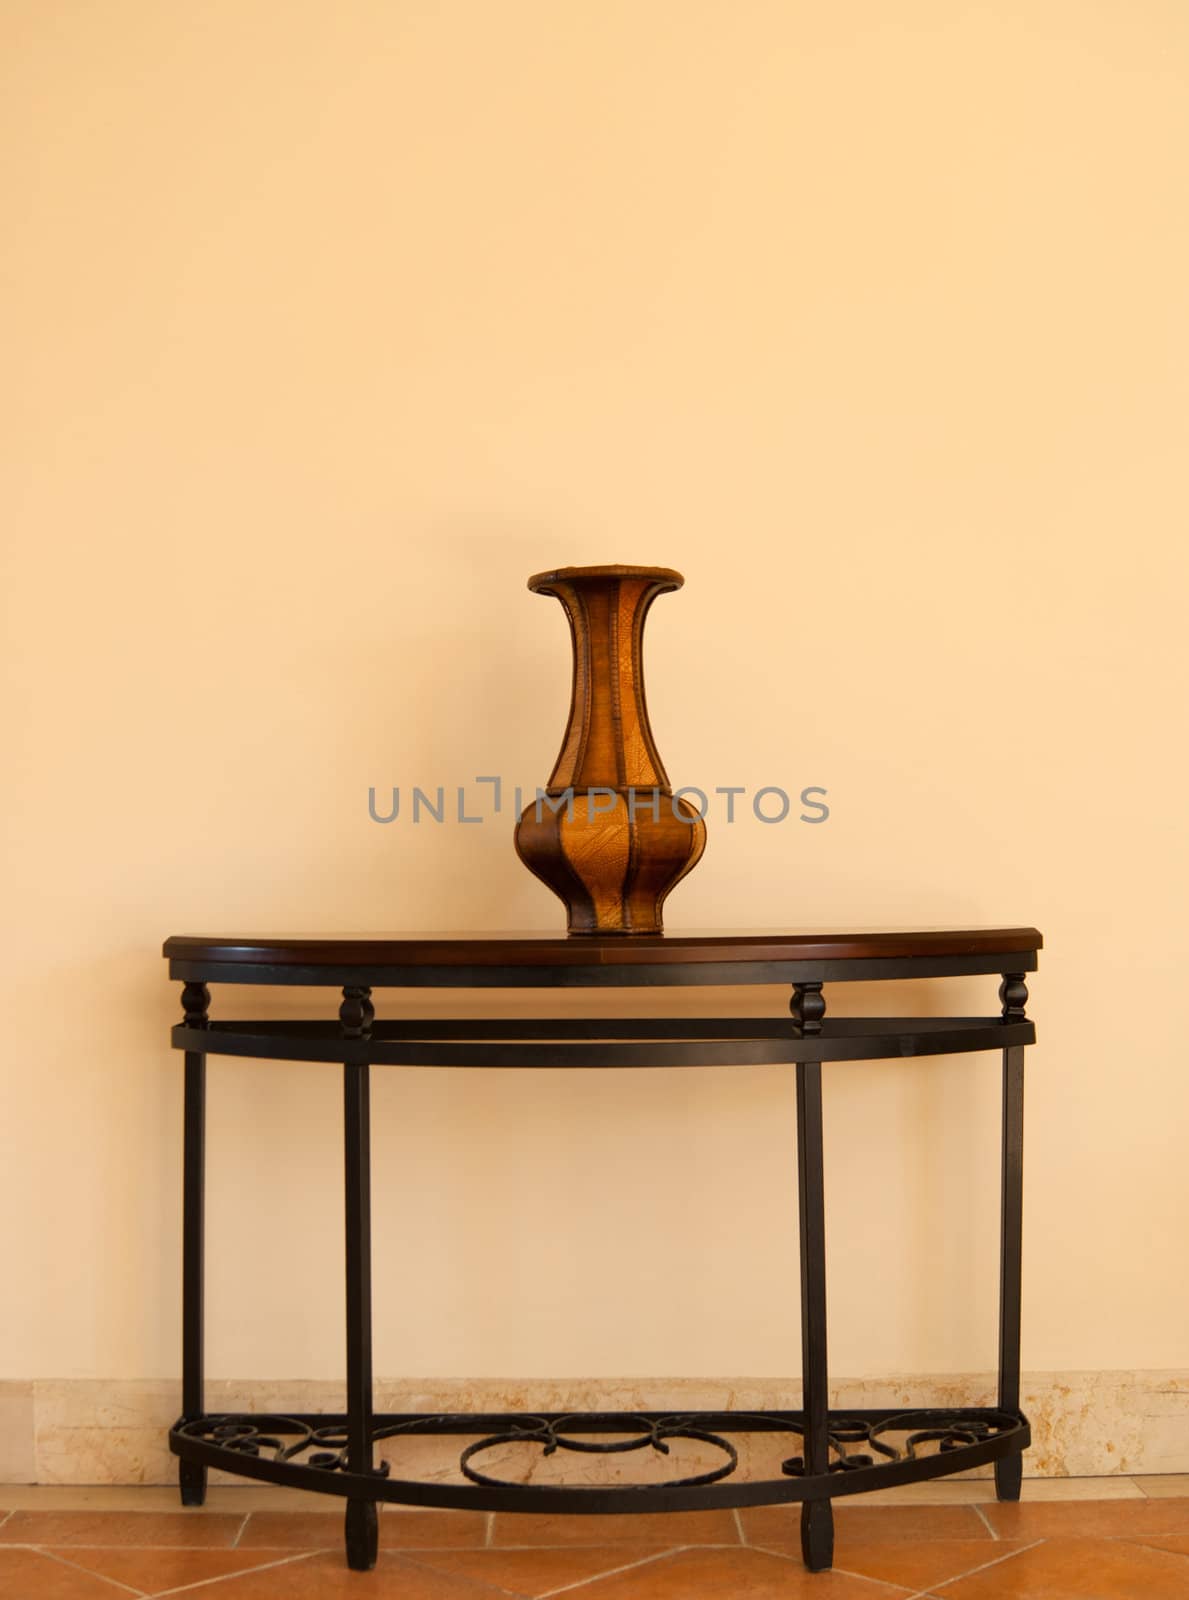 Beautiful wooden vase on table near the wall